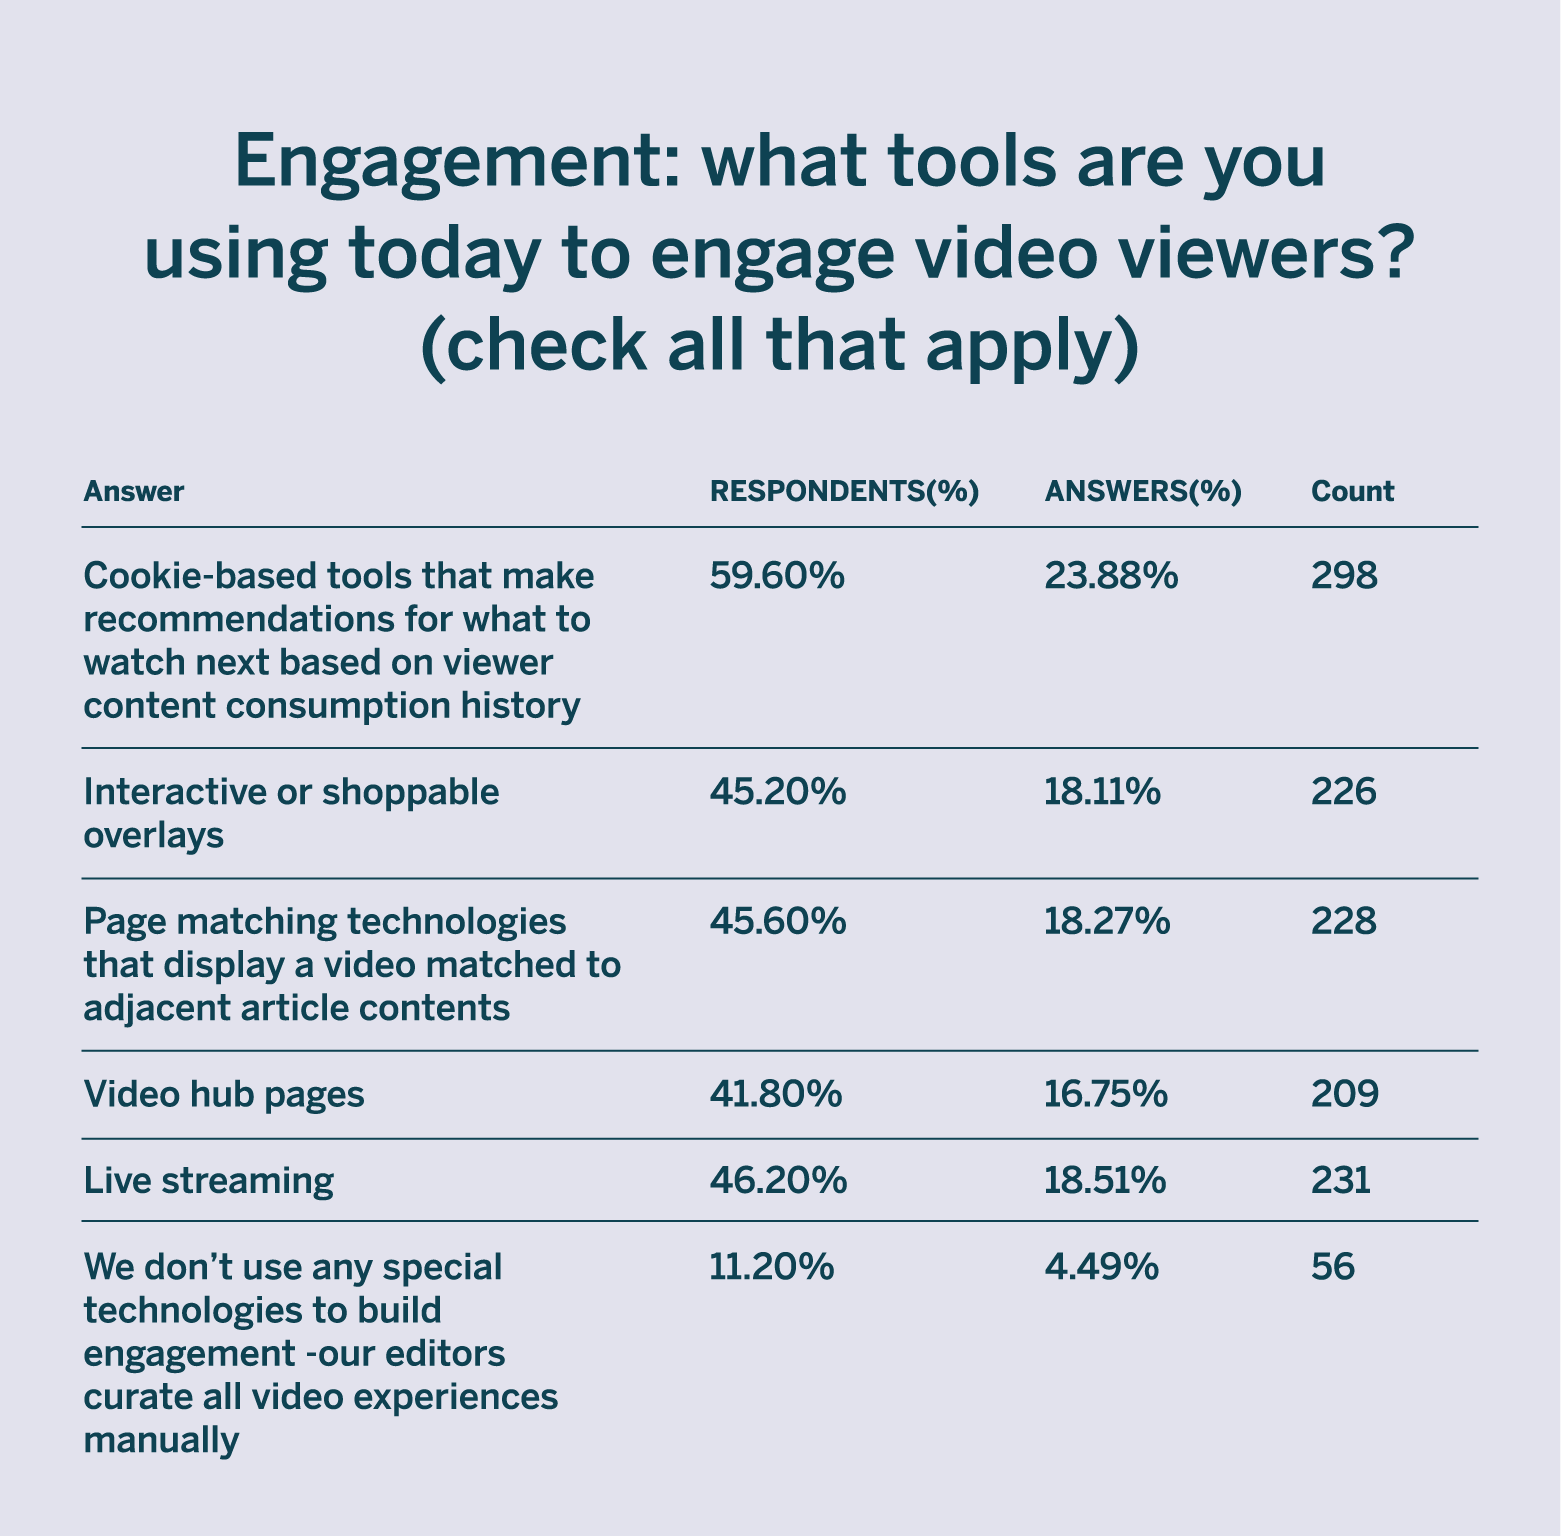 tools used to engage video viewers